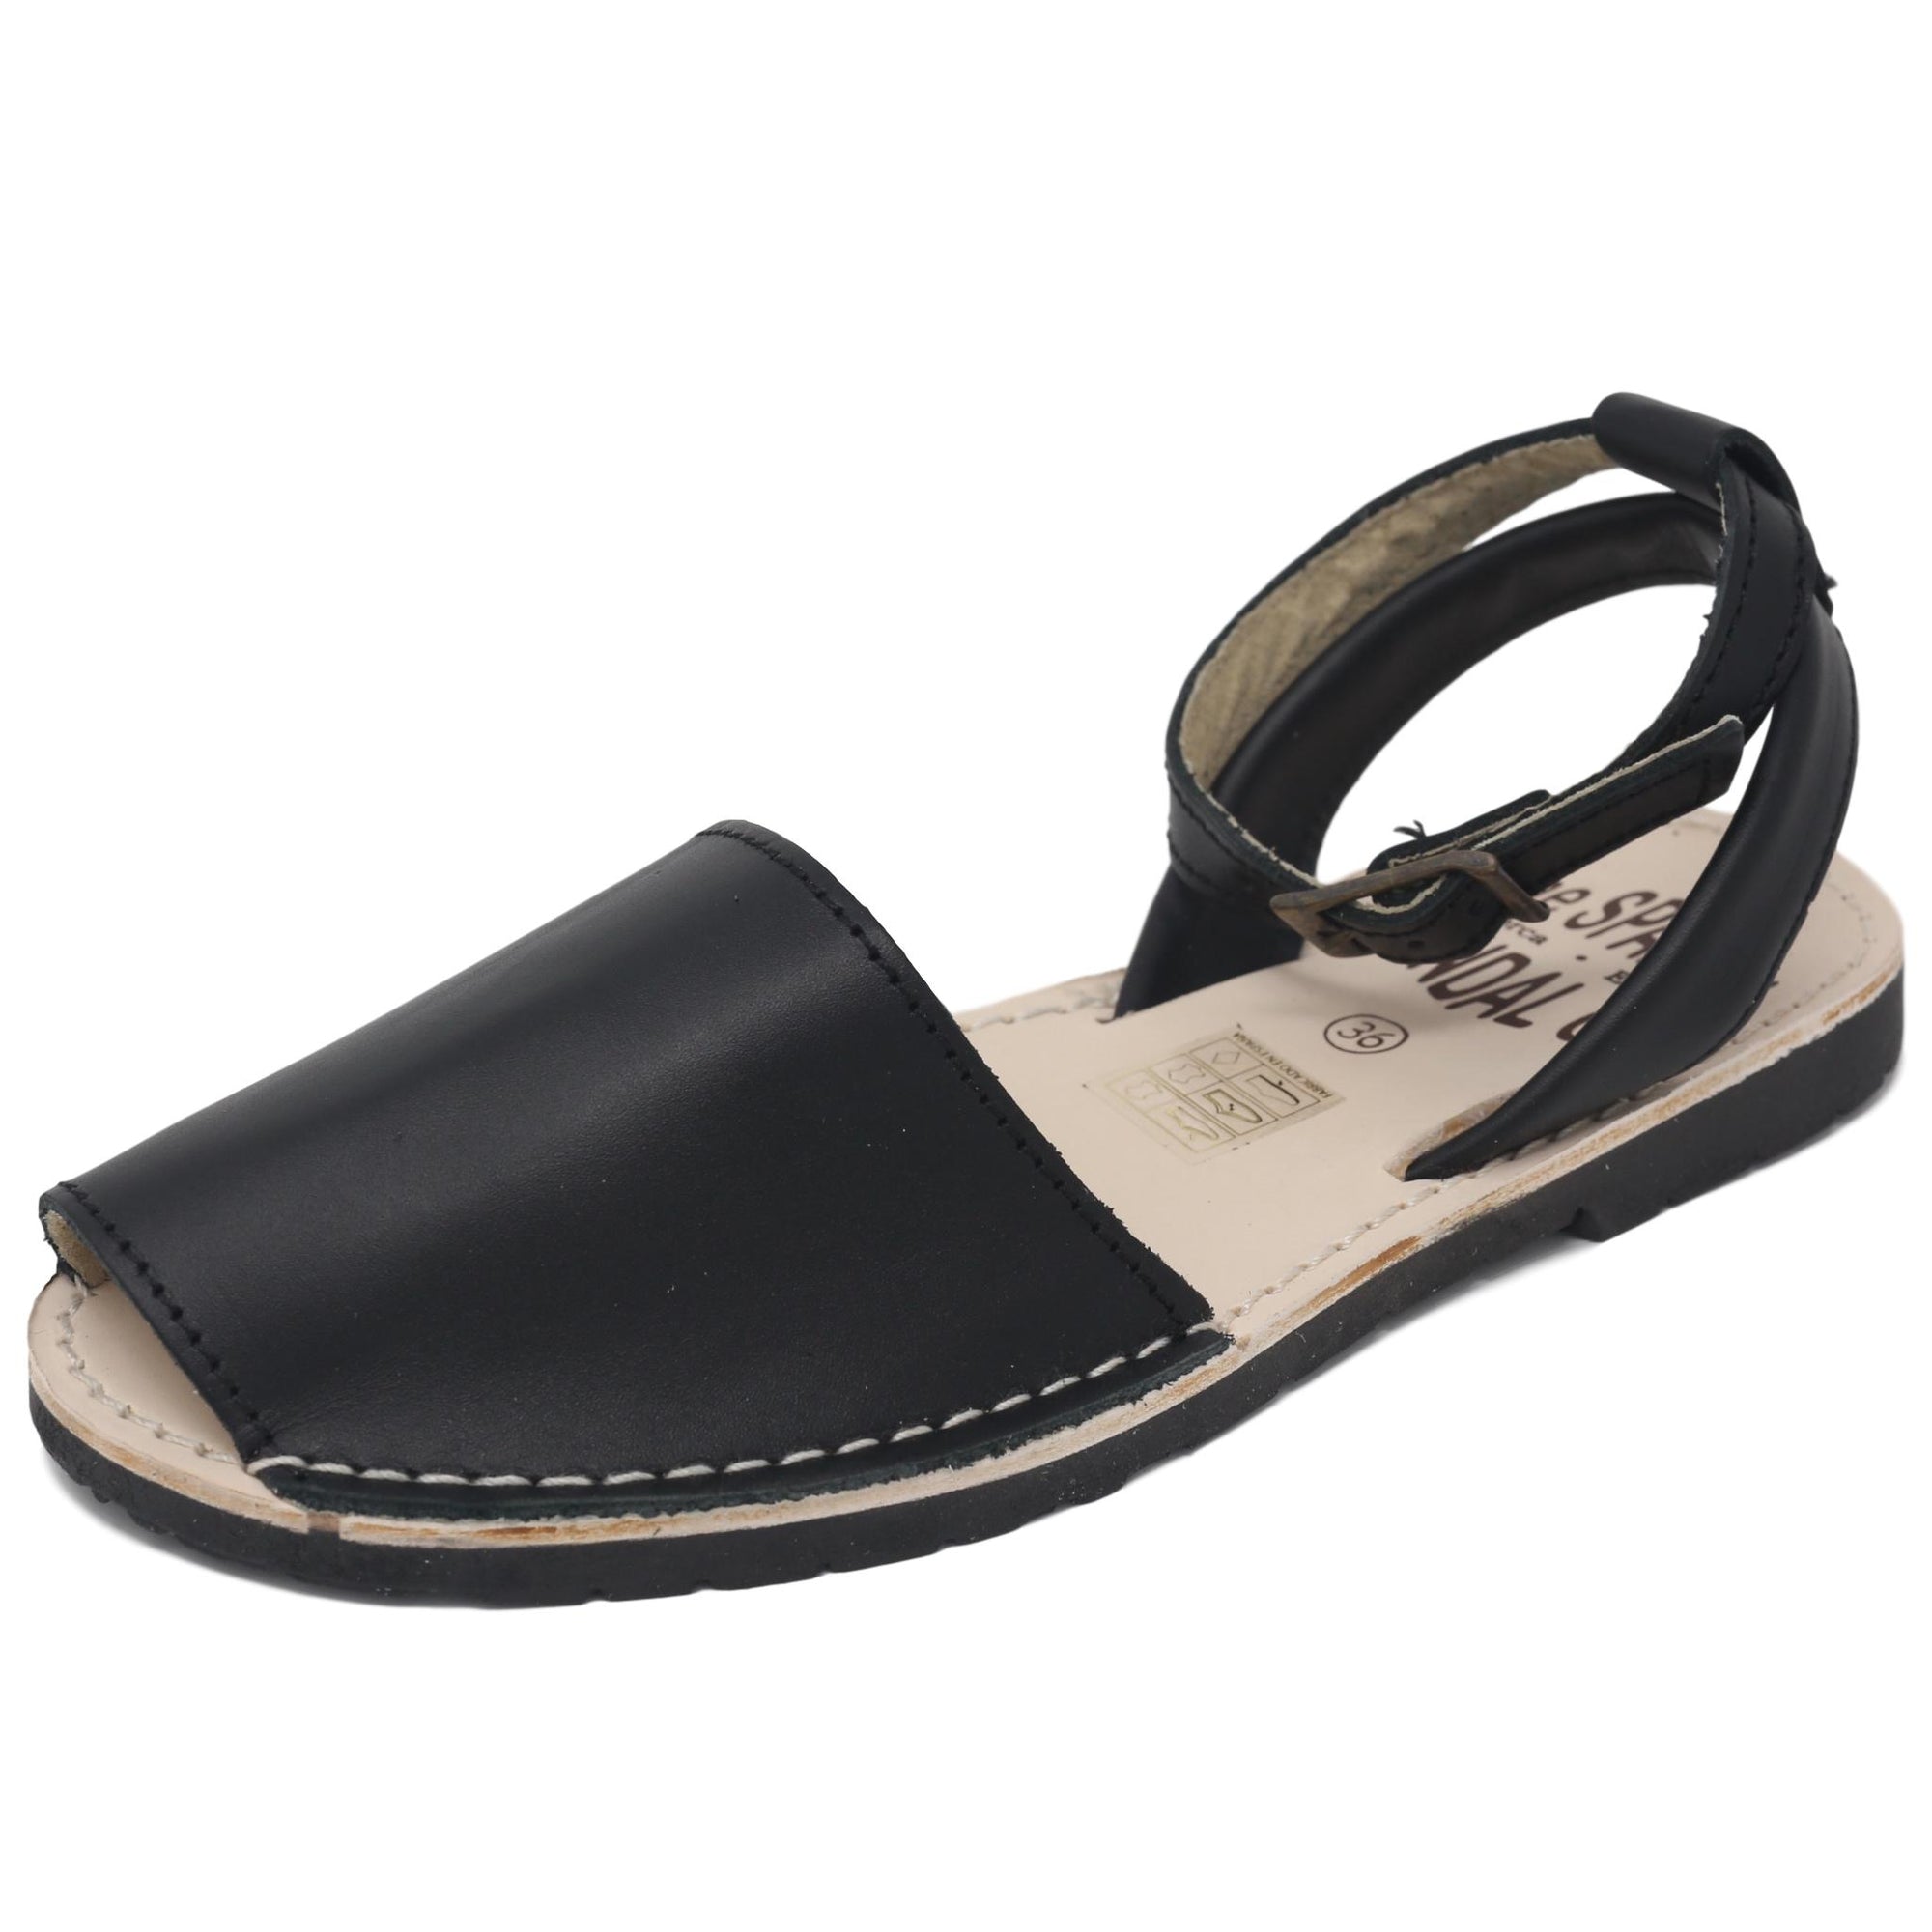 Black sandals with strap - diagonal view